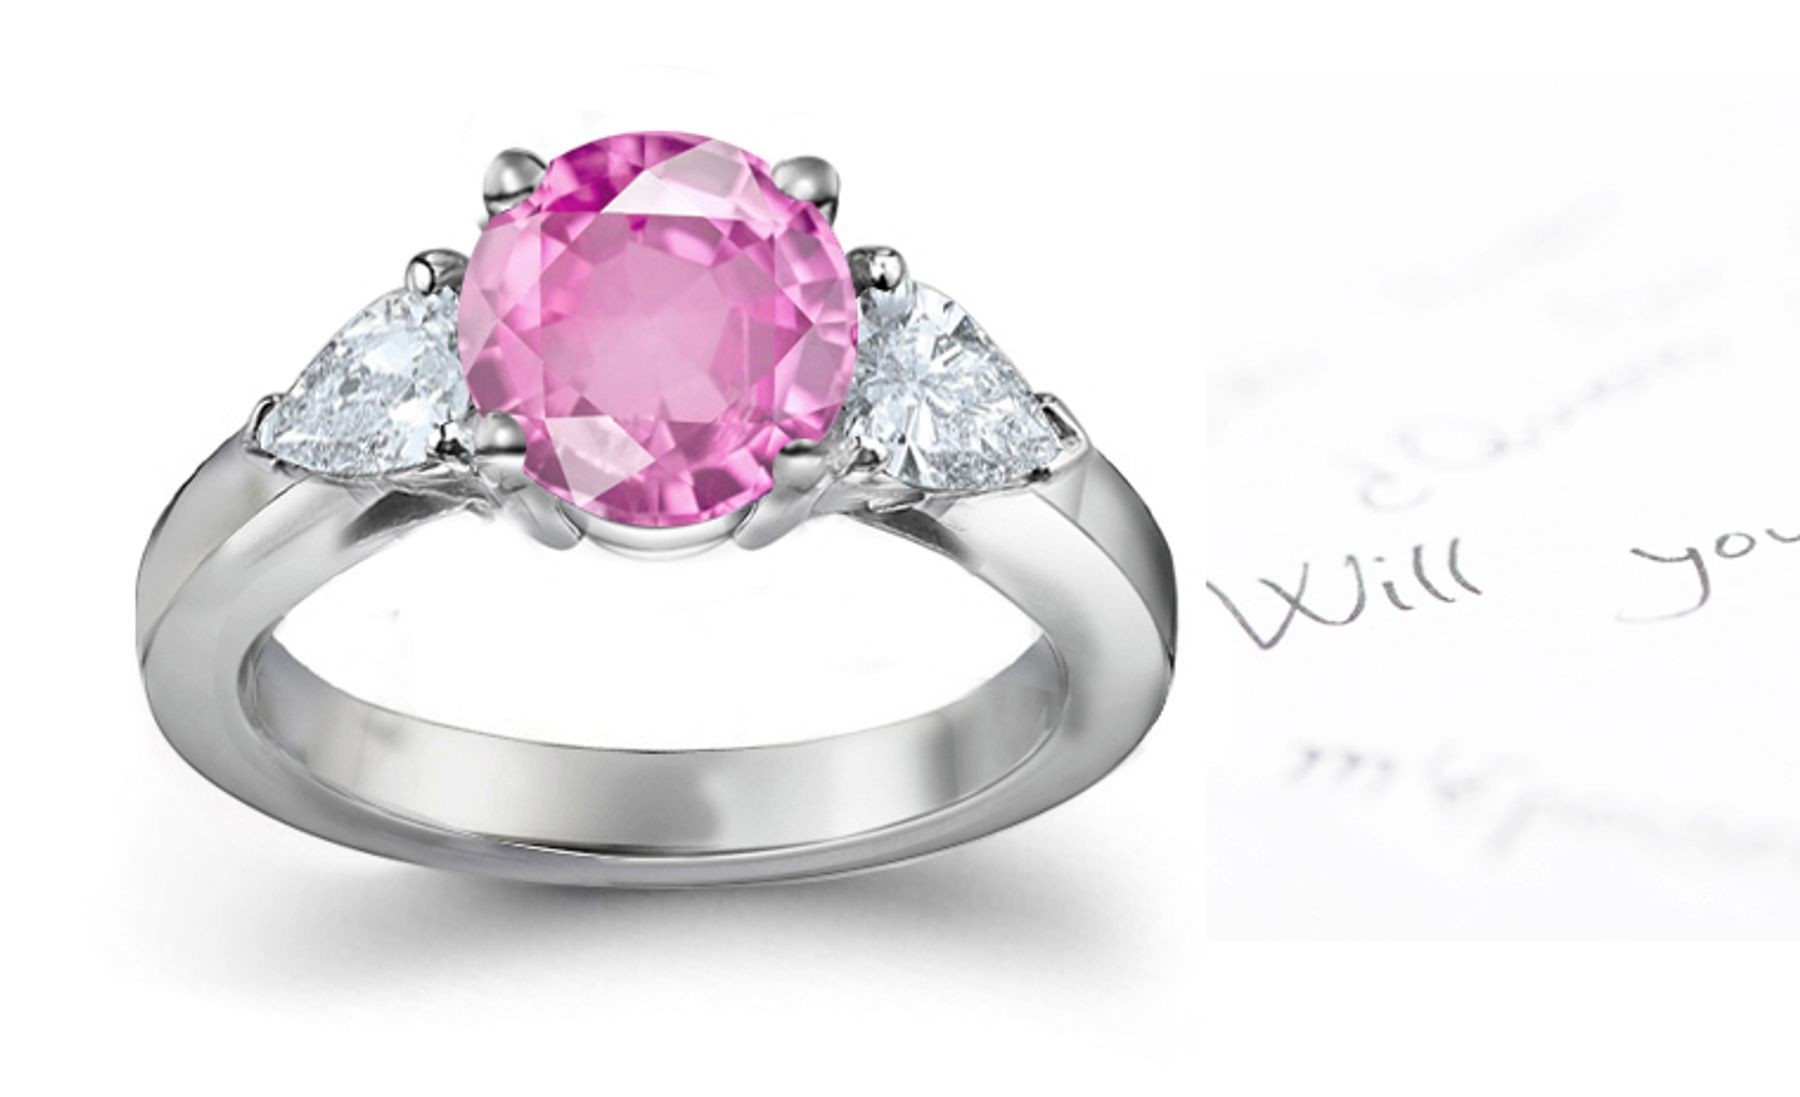 Lively Pink Sapphire & Fancy Diamond Engagement Ring Men's Matching Band Available On Reques